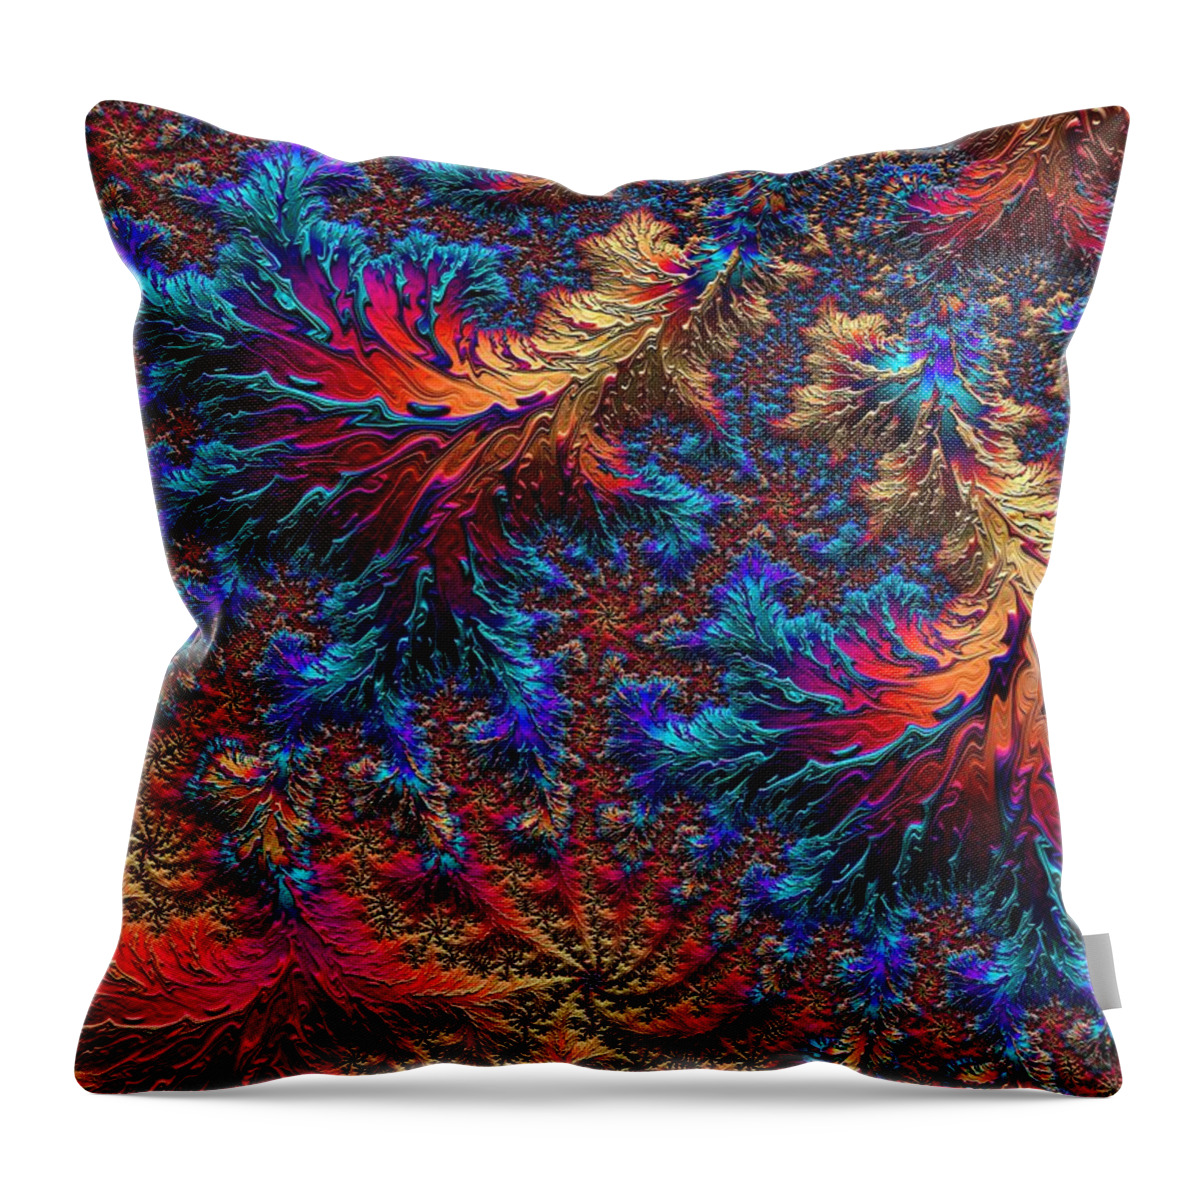 Surreal Throw Pillow featuring the digital art Fractal Jewels Series - Beauty on Fire II by Susan Maxwell Schmidt